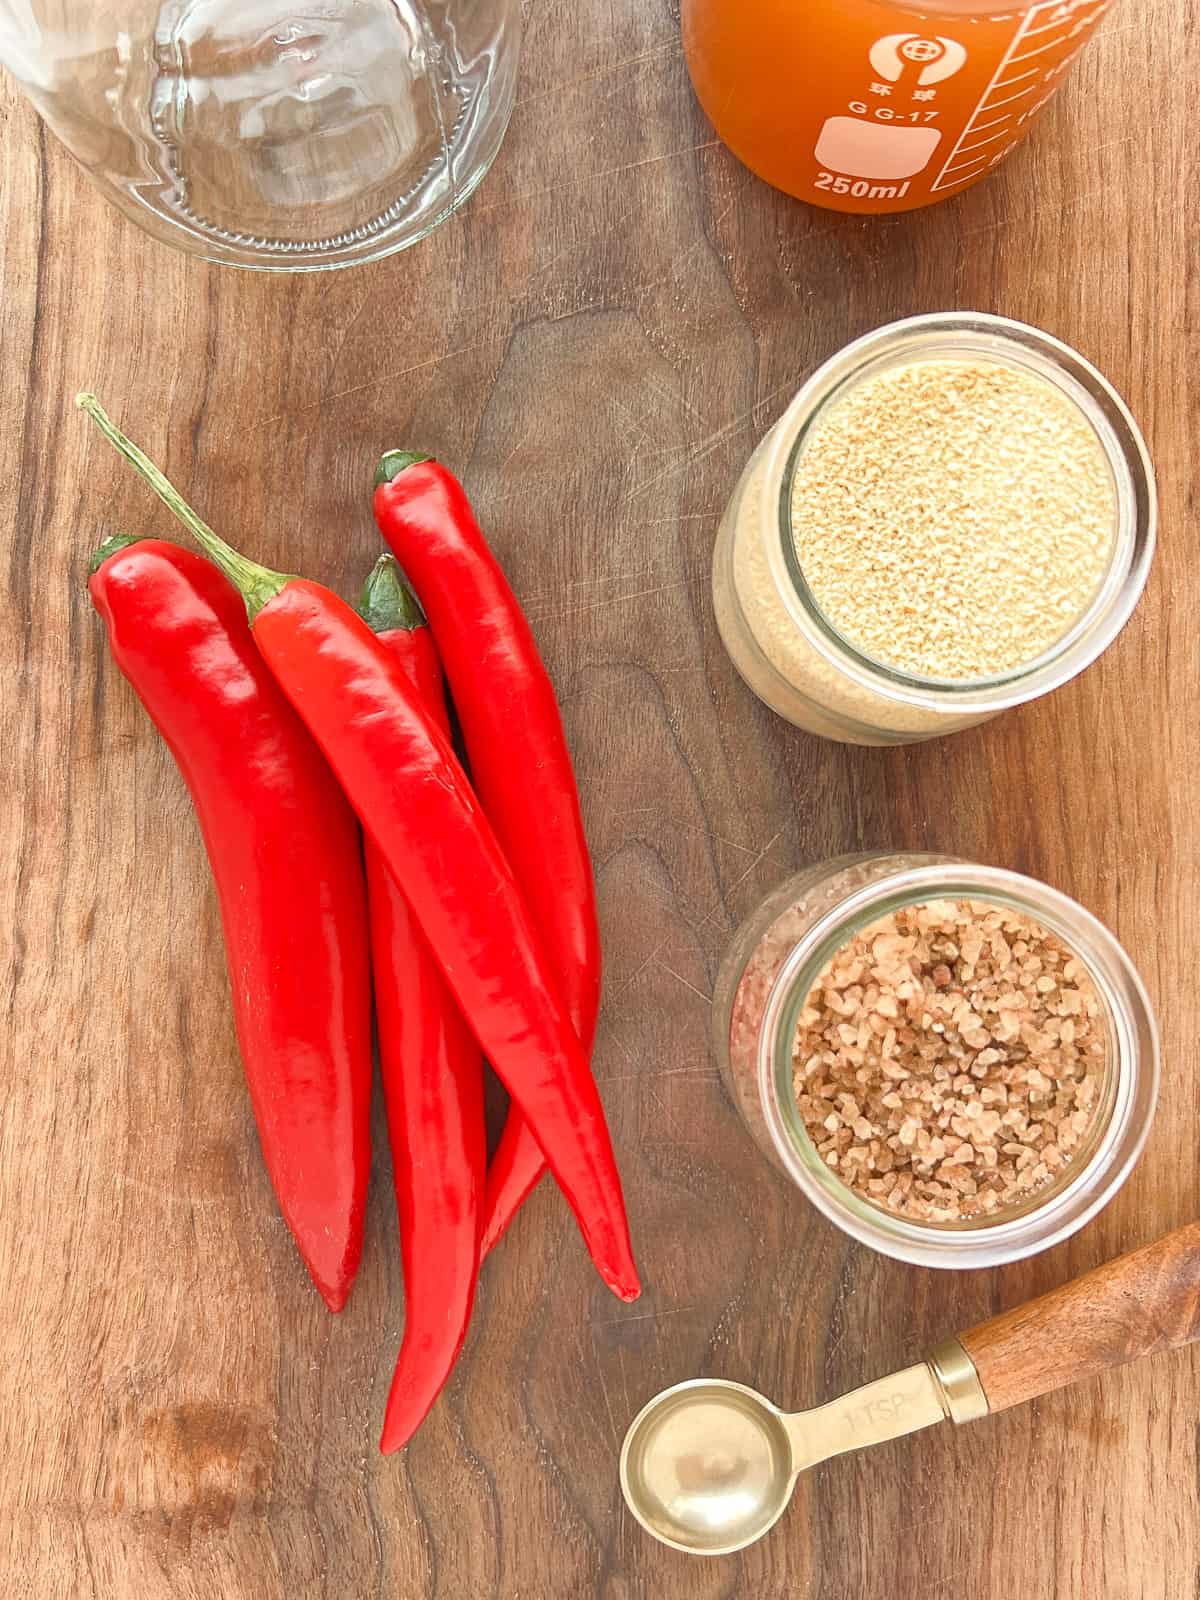 An image of the ingredients needs to make pickled hot peppers.